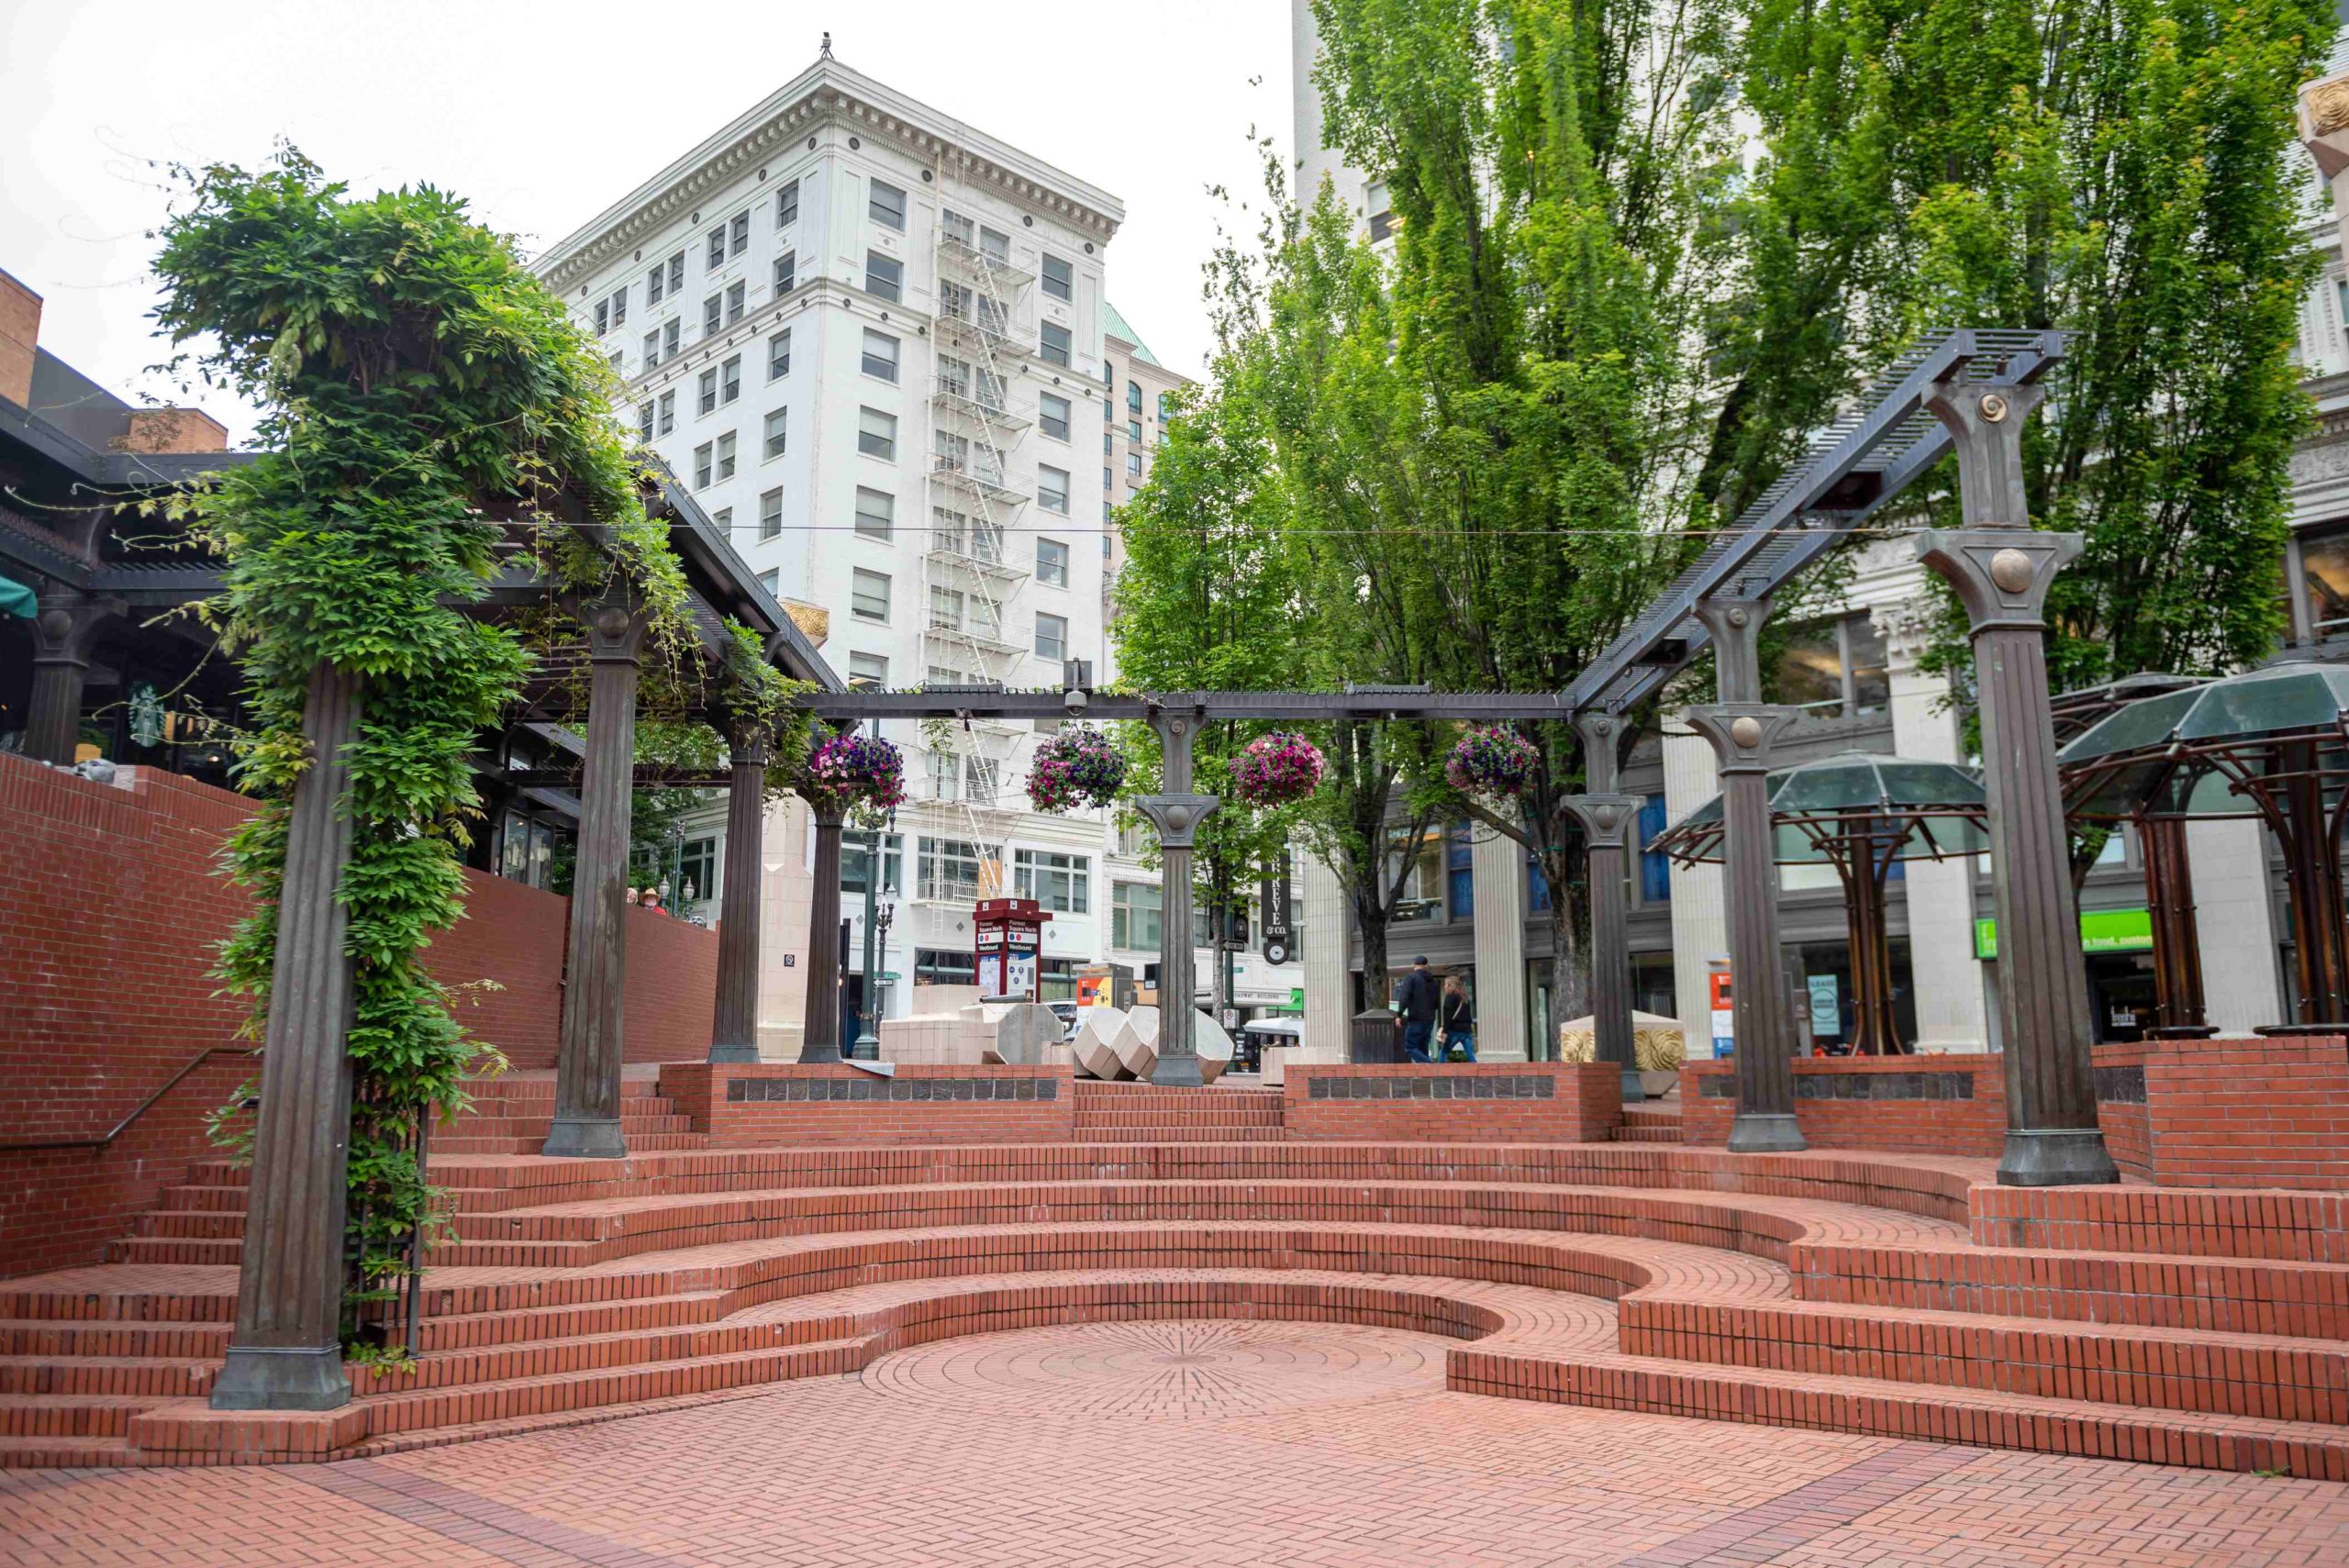 Pioneer Courthouse Square Park Updates